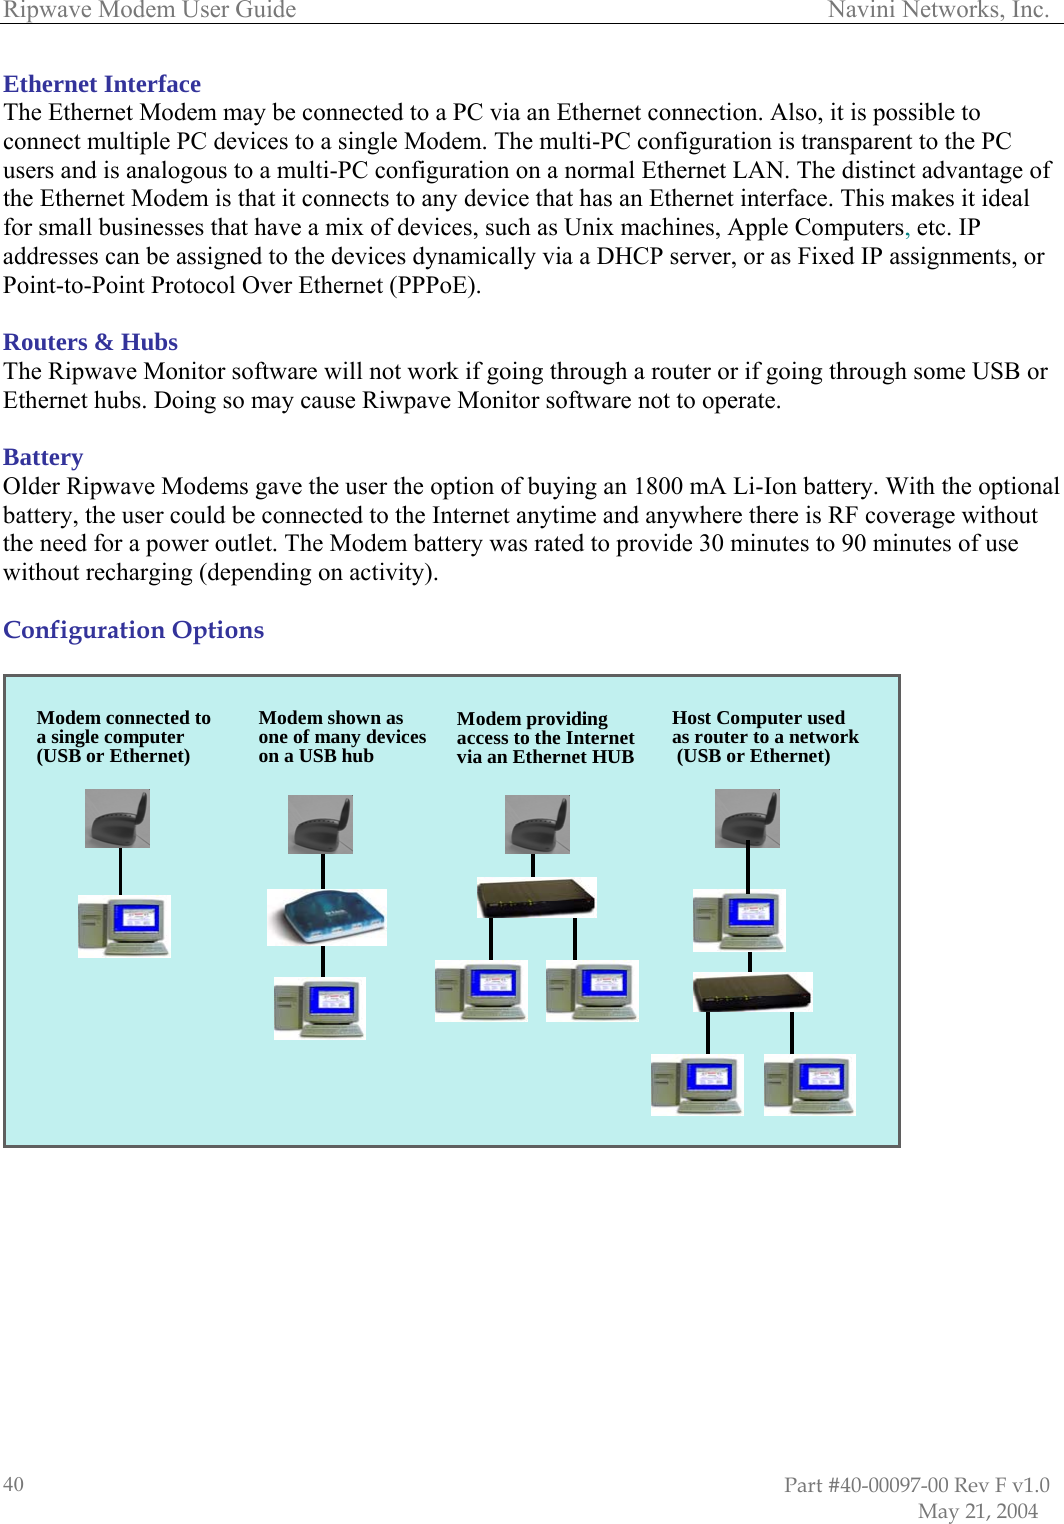 Ripwave Modem User Guide                                                                                     Navini Networks, Inc. Ethernet Interface The Eonnec  ave a mix of devices, such as Unix machines, Apple Computers, etc. IP  SB or ubs. Doing so may cause Riwpave Monitor software not to operate.  BaOlder Ripwave Modems gave the user the option of buying an 1800 mA Li-Ion battery. With the optional b he user could be conn Internet an here ther F coverage without t er outlet. Th ttery was ra e 30 minutes to 90 minutes of use without recharging (depending on activity).   Configuration Options    thernet Modem may be connected to a PC via an Ethernet connection. Also, it is possible to t multiple PC devices to a single Modem. The multi-PC configuration is transparent to the PCcusers and is analogous to a multi-PC configuration on a normal Ethernet LAN. The distinct advantage of e Ethernet Modem is that it connects to any device that has an Ethernet interface. This makes it ideal thfor small businesses that haddresses can be assigned to the devices dynamically via a DHCP server, or as Fixed IP assignments, orPoint-to-Point Protocol Over Ethernet (PPPoE).  Routers &amp; Hubs The Ripwave Monitor software will not work if going through a router or if going through some Uthernet hE ttery attery, t ected to the  ytime and anyw e is Rhe need for a pow e Modem ba ted to provid                        Host Computer used as router to a network(USB or Ethernet)Modem shown as Modem connected to one of many devices on a USB huba single computer(USB or Ethernet)Modem providing the Internethernet HUBaccess toa an EtviHost Computer used as router to a network(USB or Ethernet)Modem shown as Modem connected to Modem providing the Internethernet HUBa single computer(USB or Ethernet) one of many devices on a USB hub access toa an Etvi                                                                                                                        Part #40-00097-00 Rev F v1.0                           May 21, 2004 40